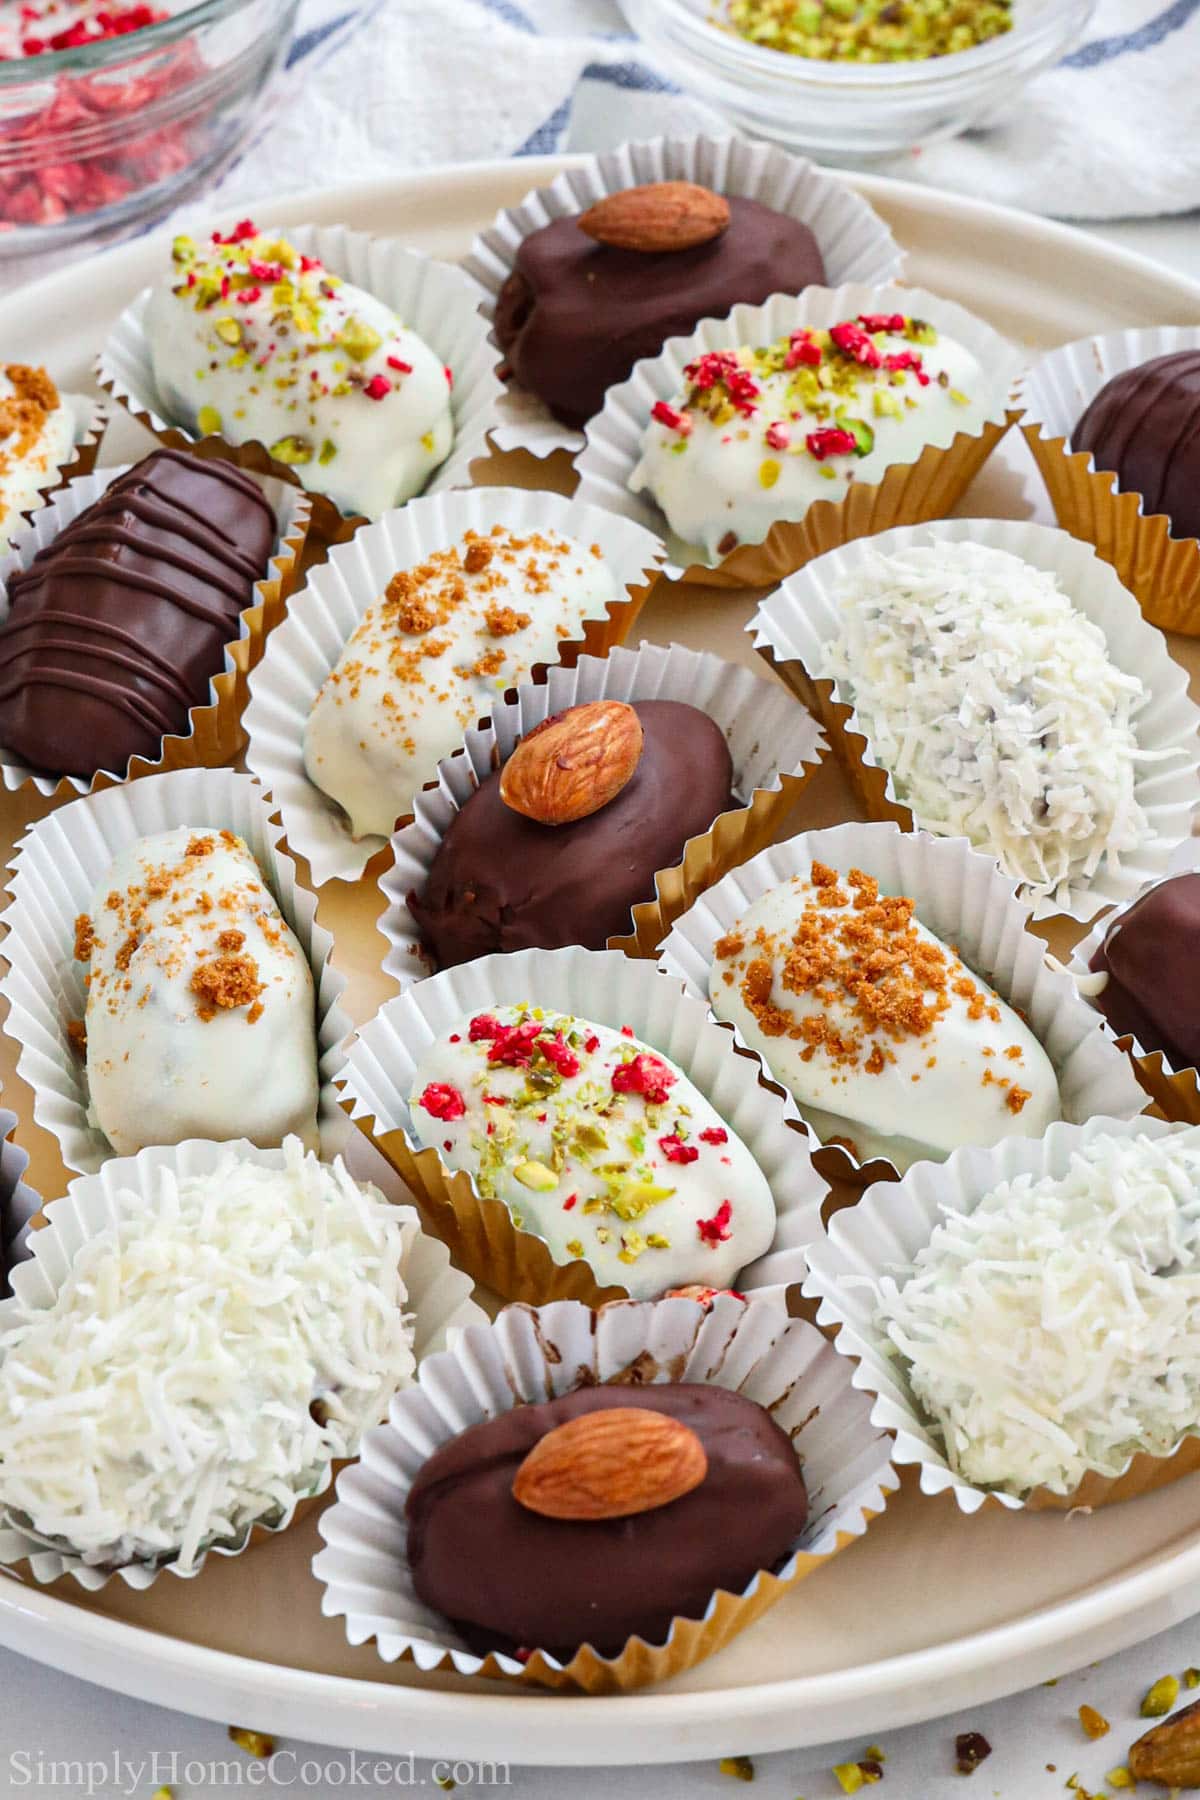 Plate of Chocolate Covered Dates in wrappers, some topped with nuts and coconut flakes.